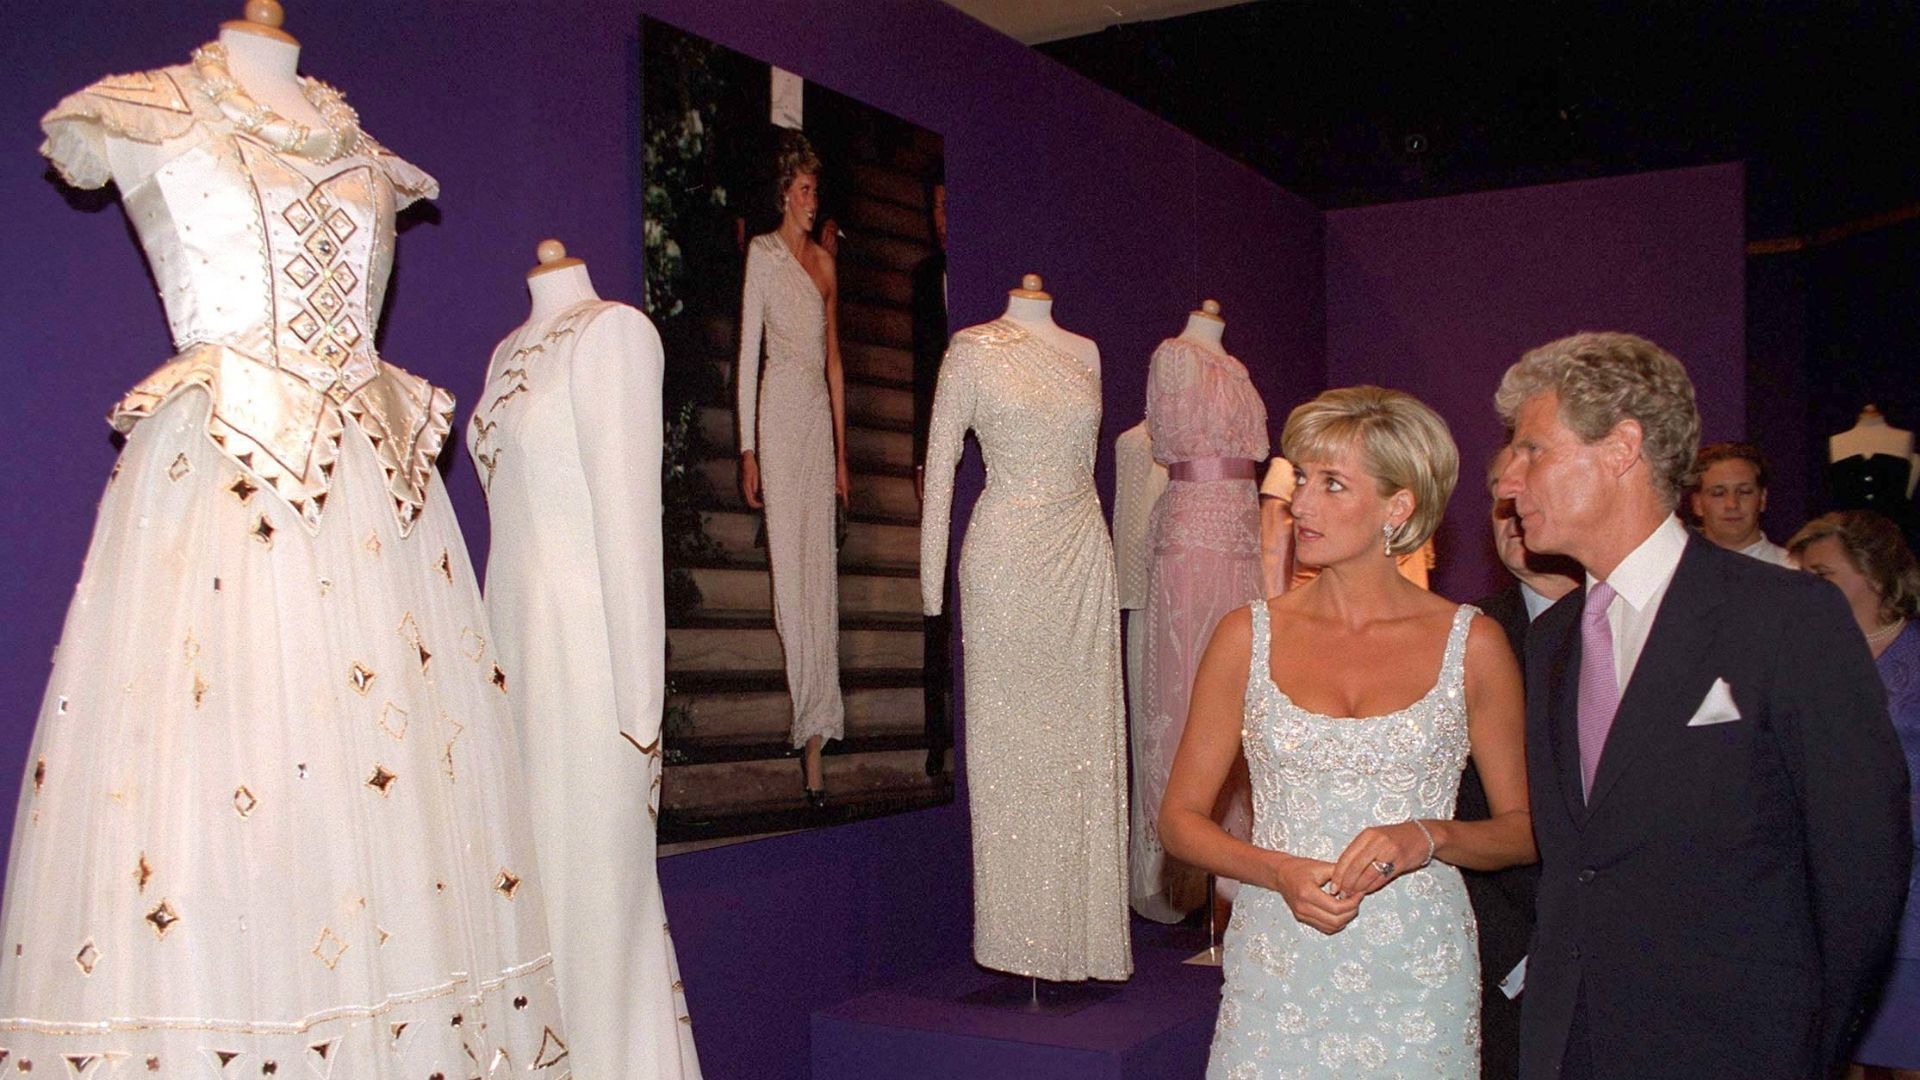 <p>                     In the summer of 1997, Princess Diana decided, with some inspiration from a young Prince William, that she would auction off 79 of her most iconic dresses. The money raised was spread between several charities close to her heart, with the auction bringing in millions. She even sold the iconic revenge dress! Even decades later some of Princess Diana's most famed dresses were going up for auction and being sold for millions.                   </p>